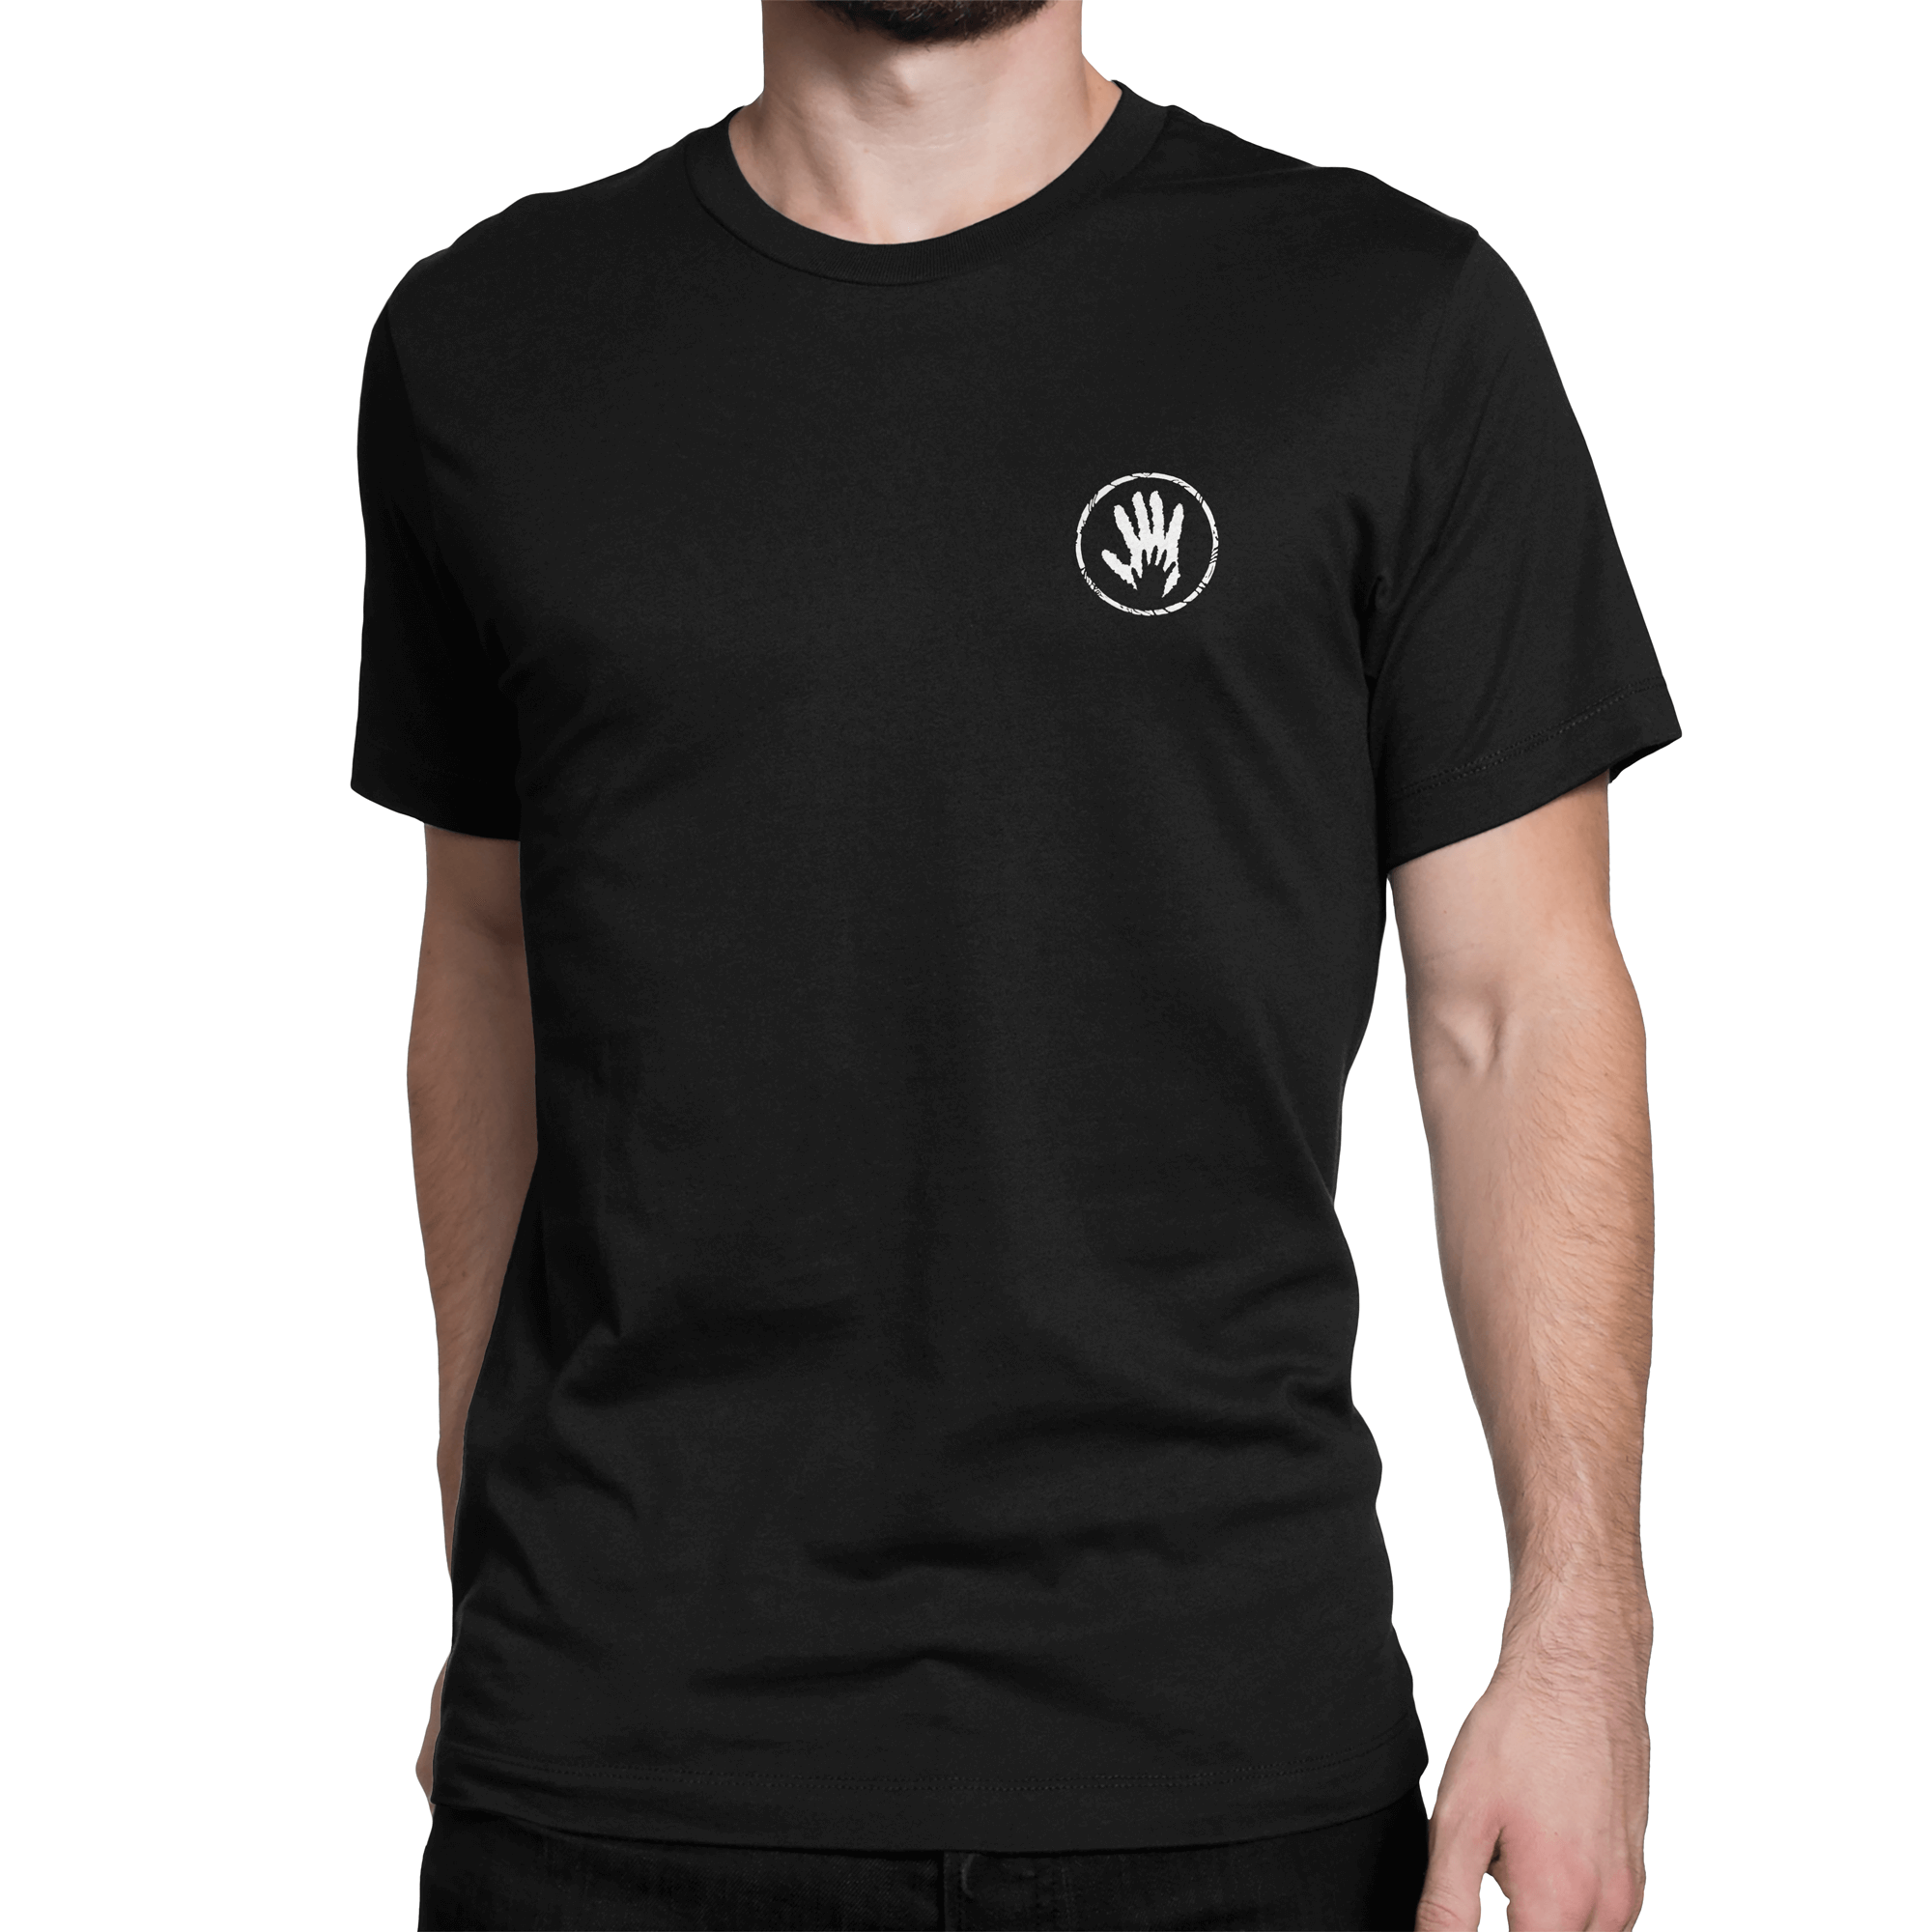 The Younger Brothers Premium T-Shirt, black, hands and rays